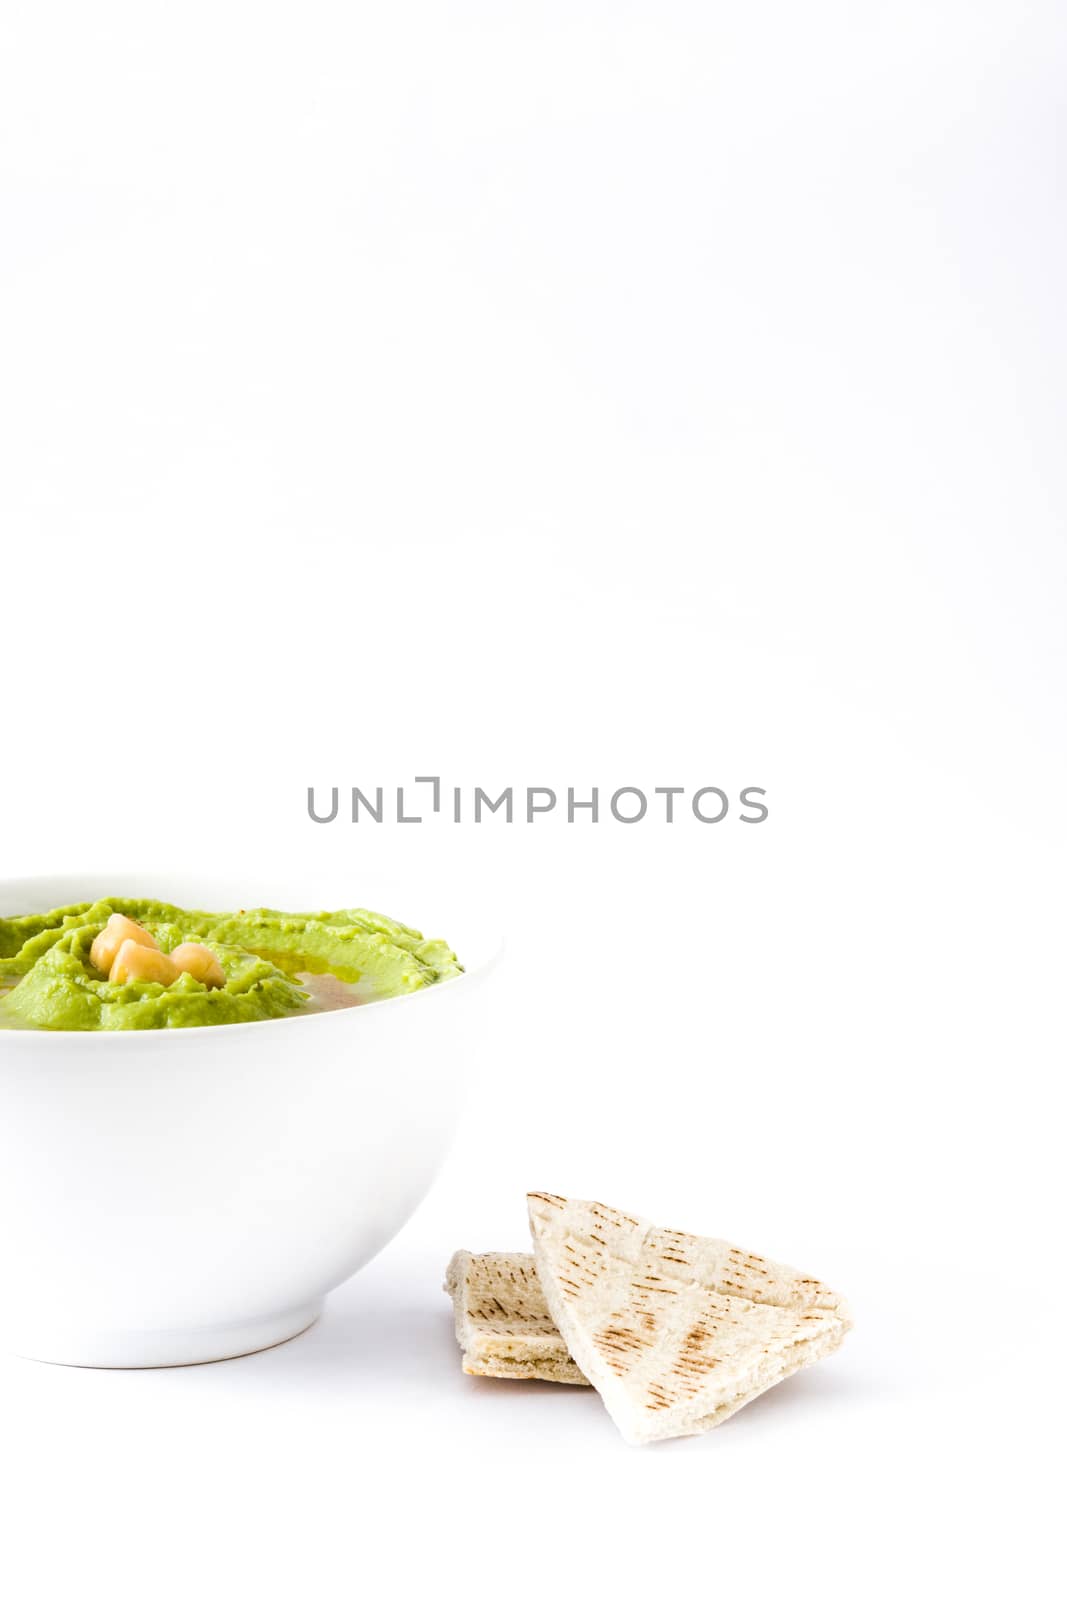 Avocado hummus in bowl isolated on white background by chandlervid85